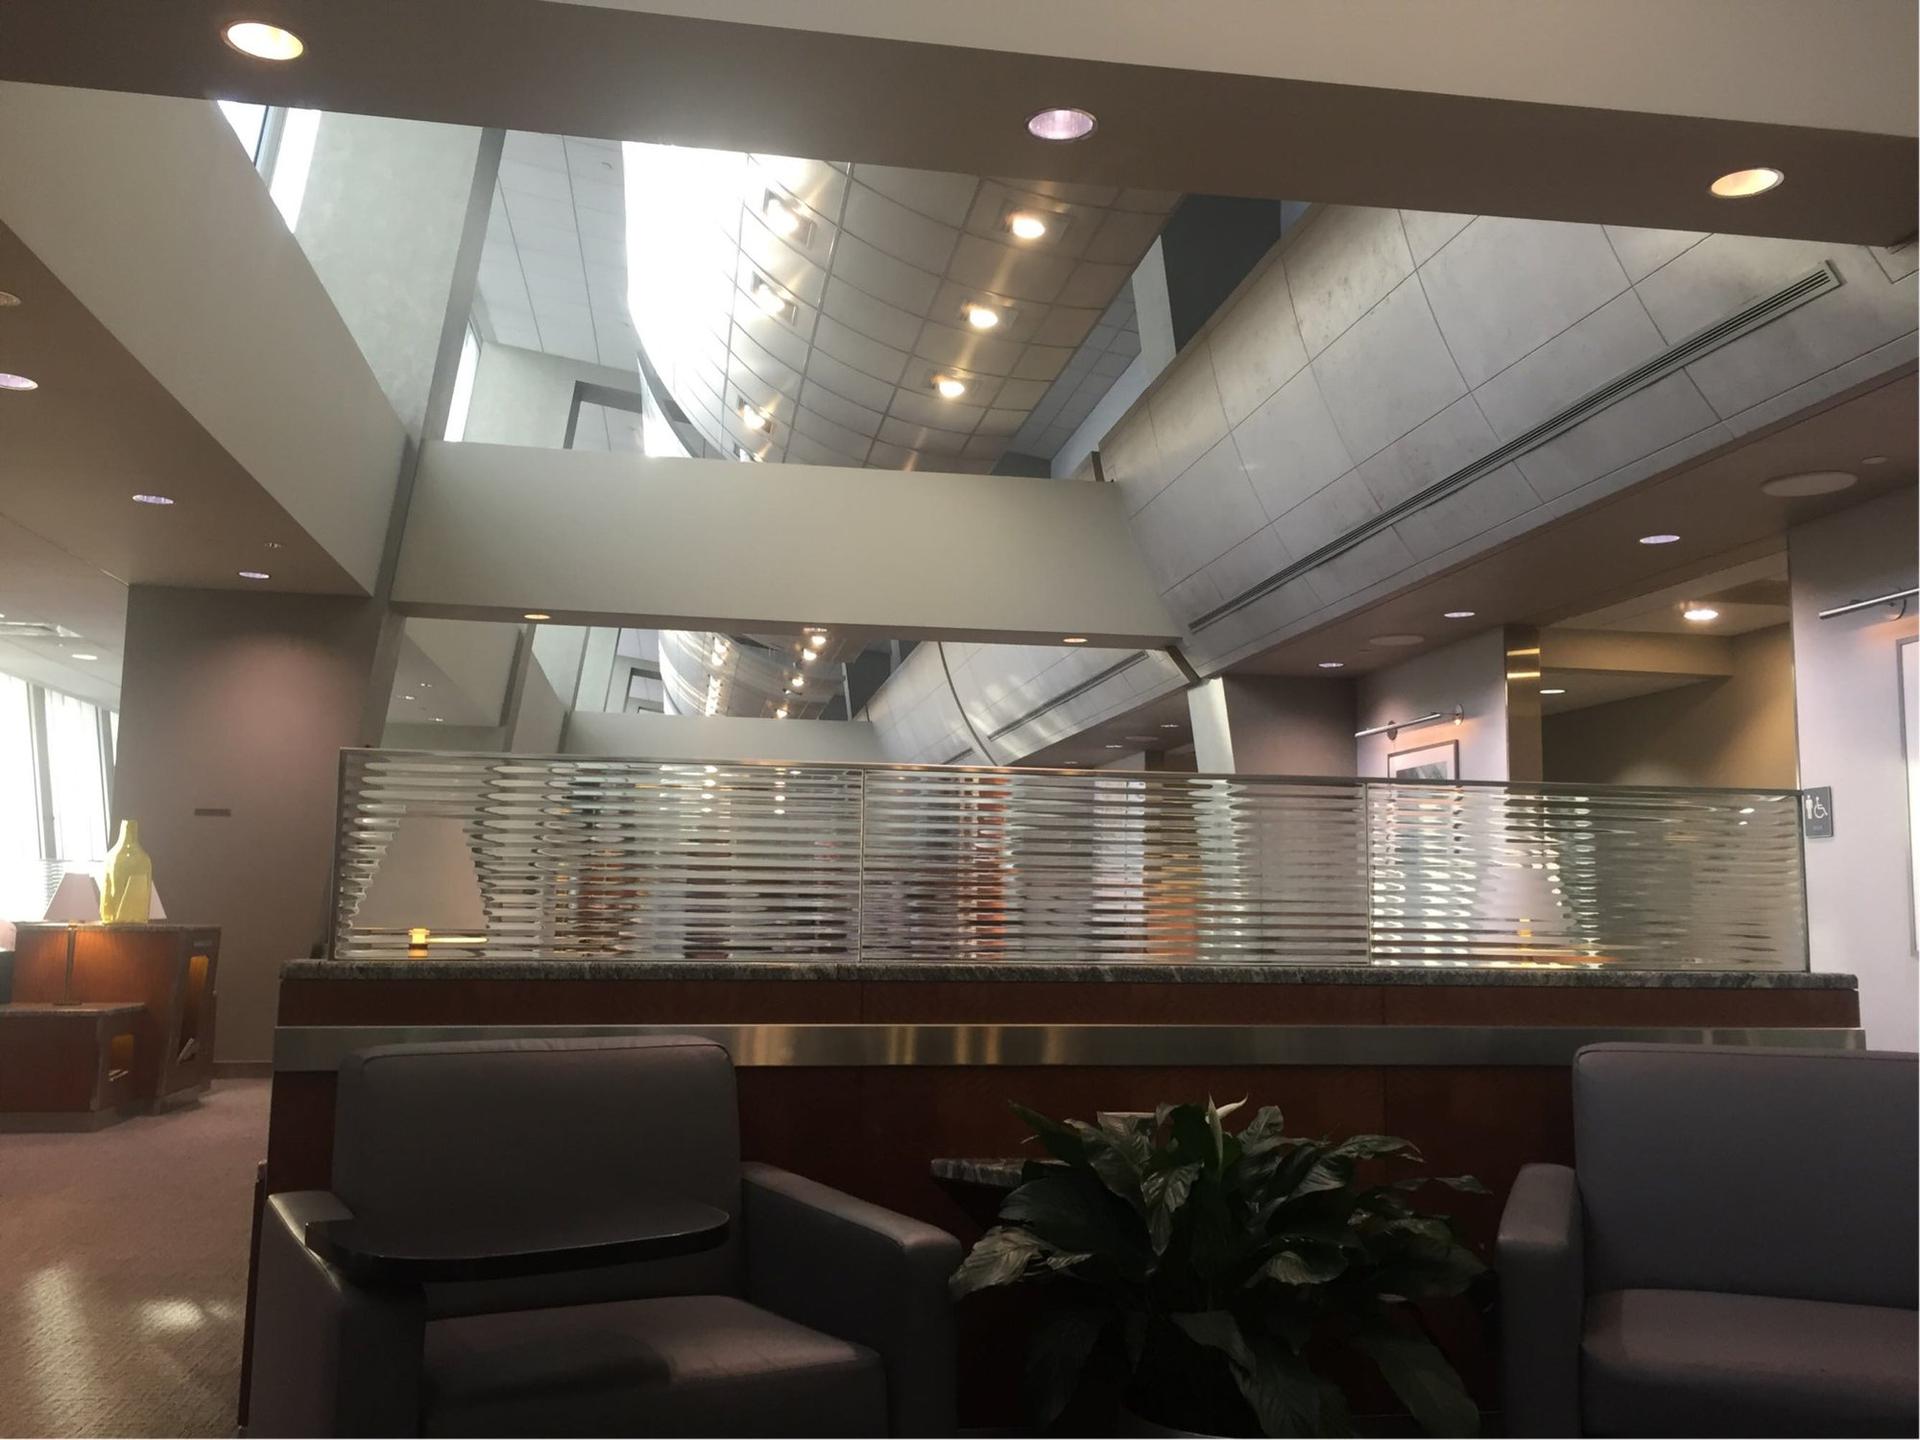 American Airlines Admirals Club image 43 of 48